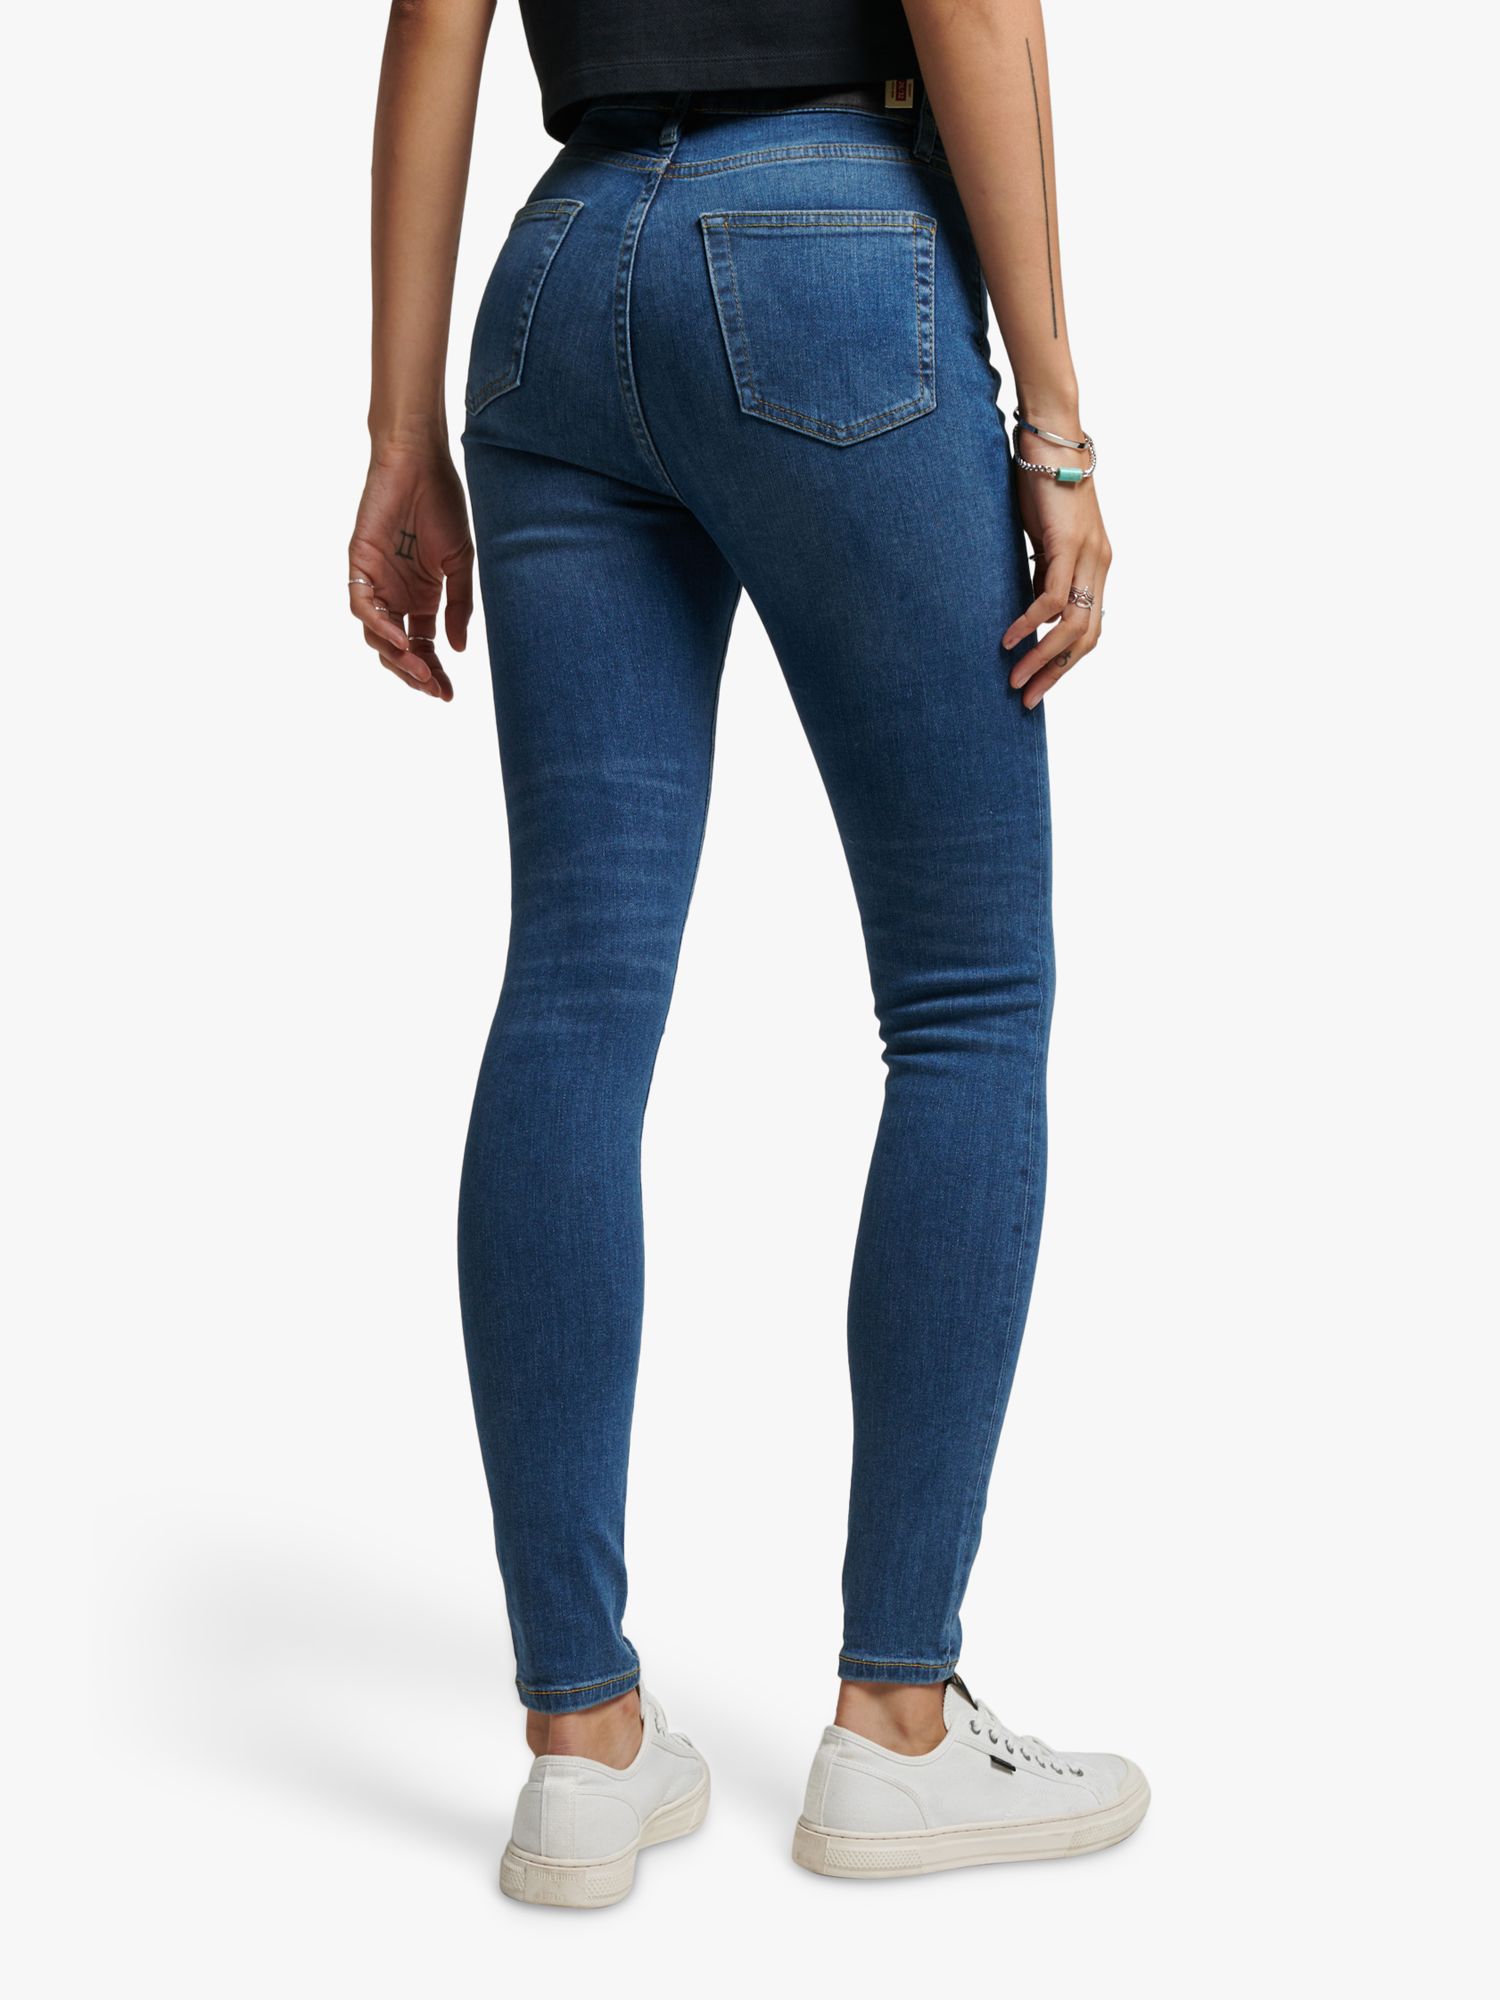 Superdry UK High Rise Skinny Jeans - Womens Sale Womens Trousers